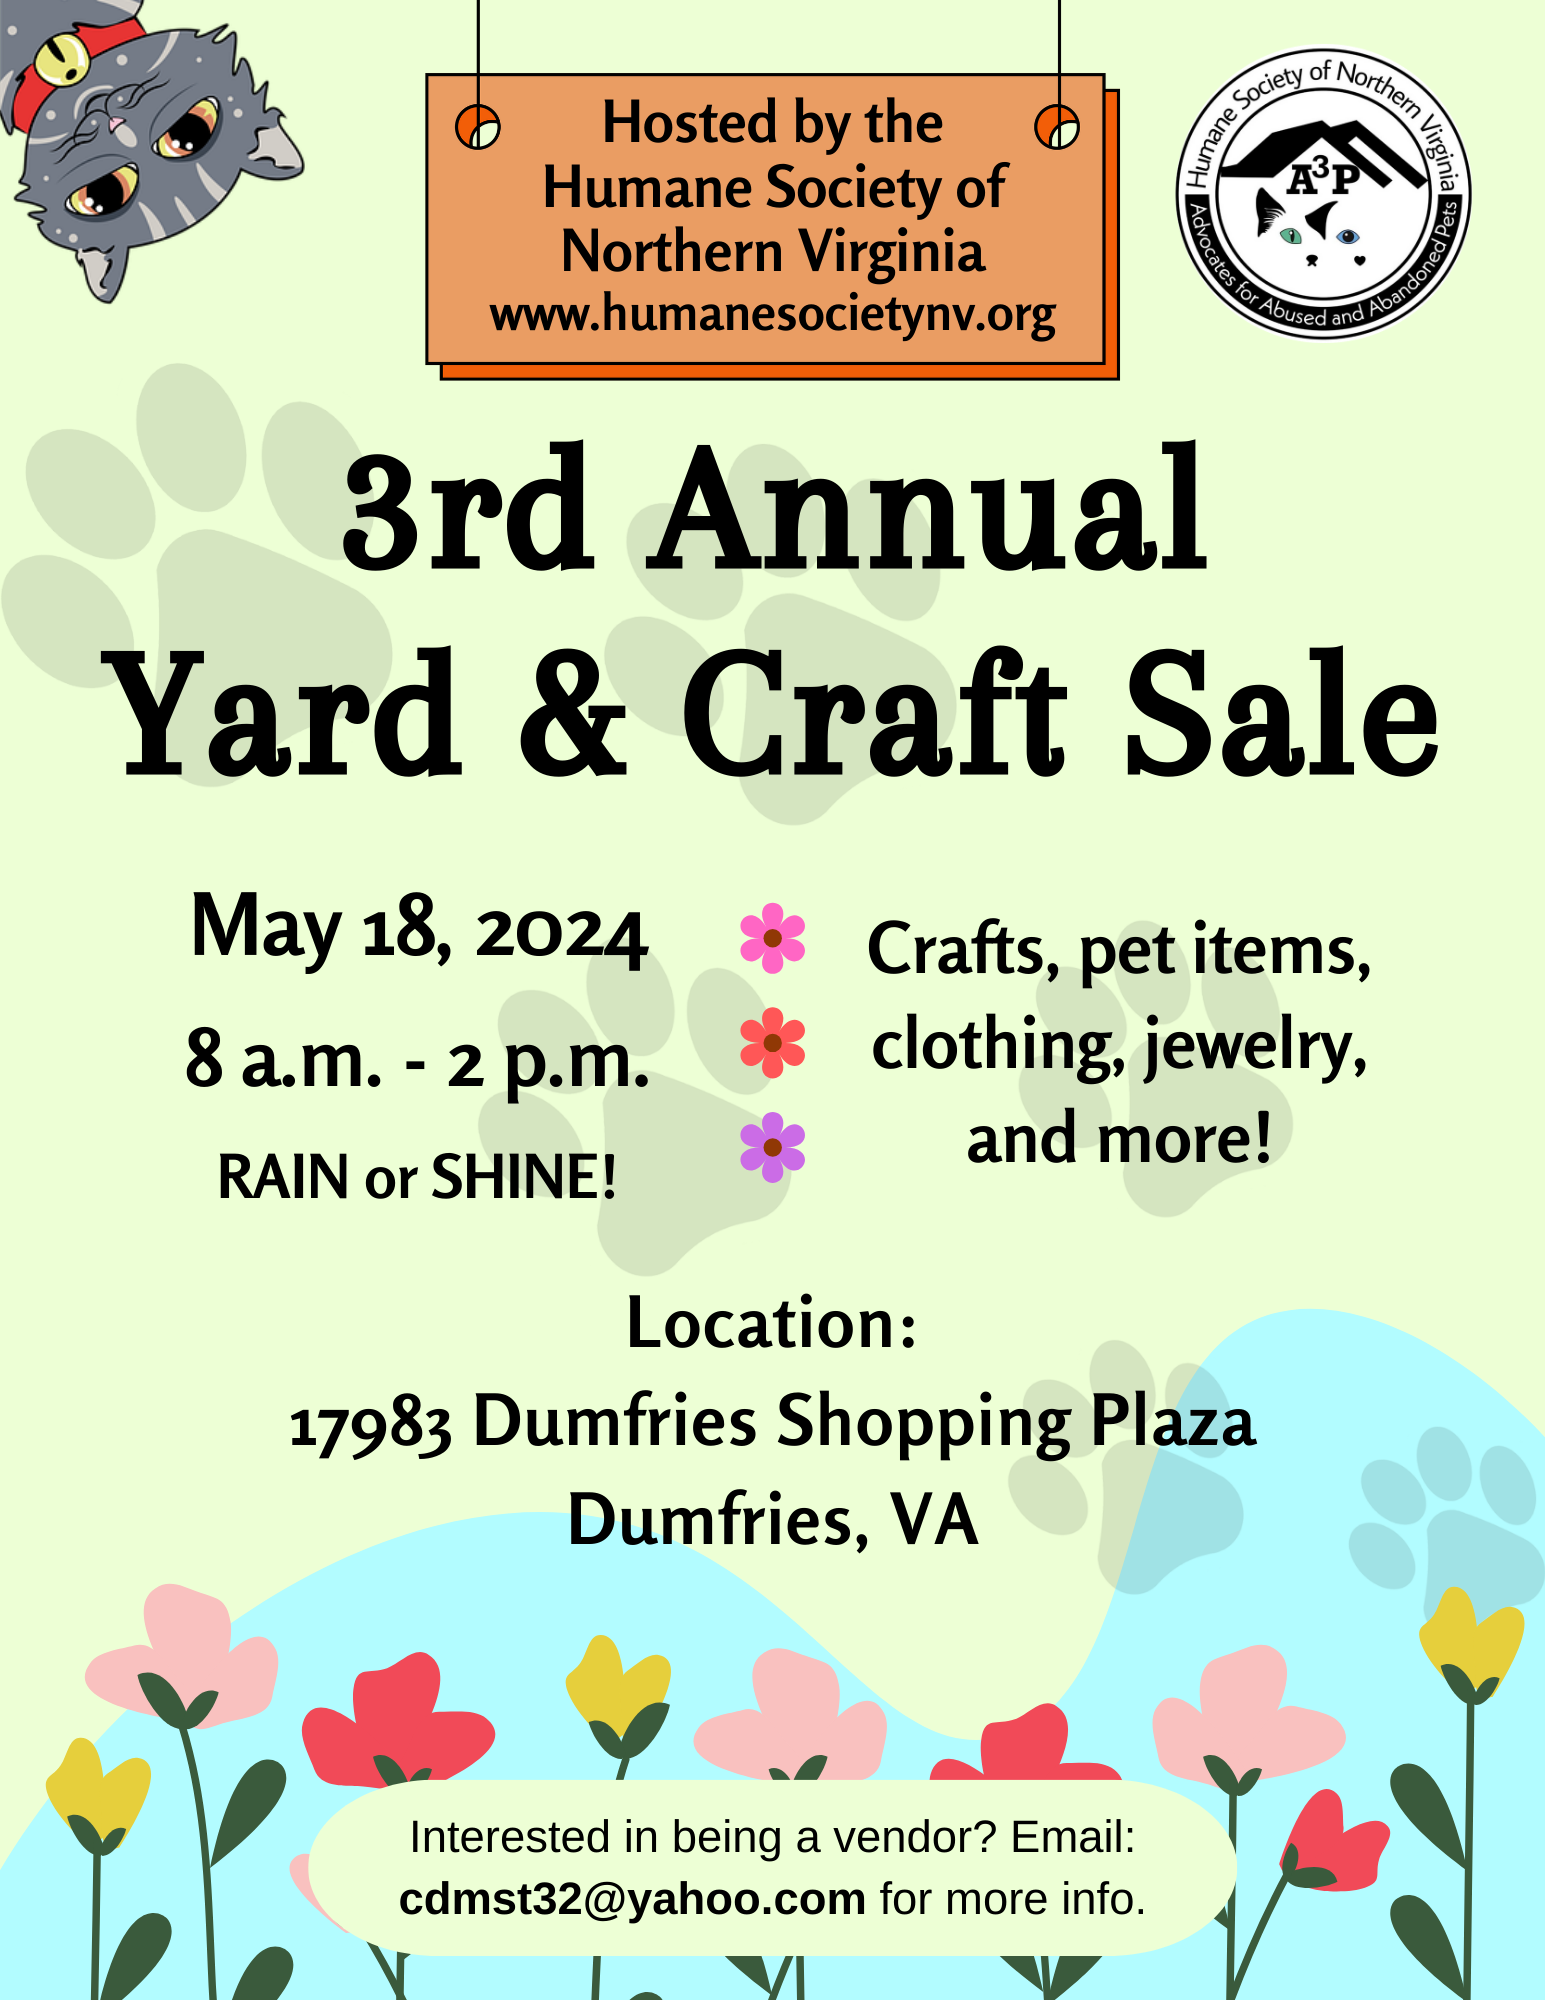 <h1 class="tribe-events-single-event-title">3rd Annual Yard and Craft Sale</h1>